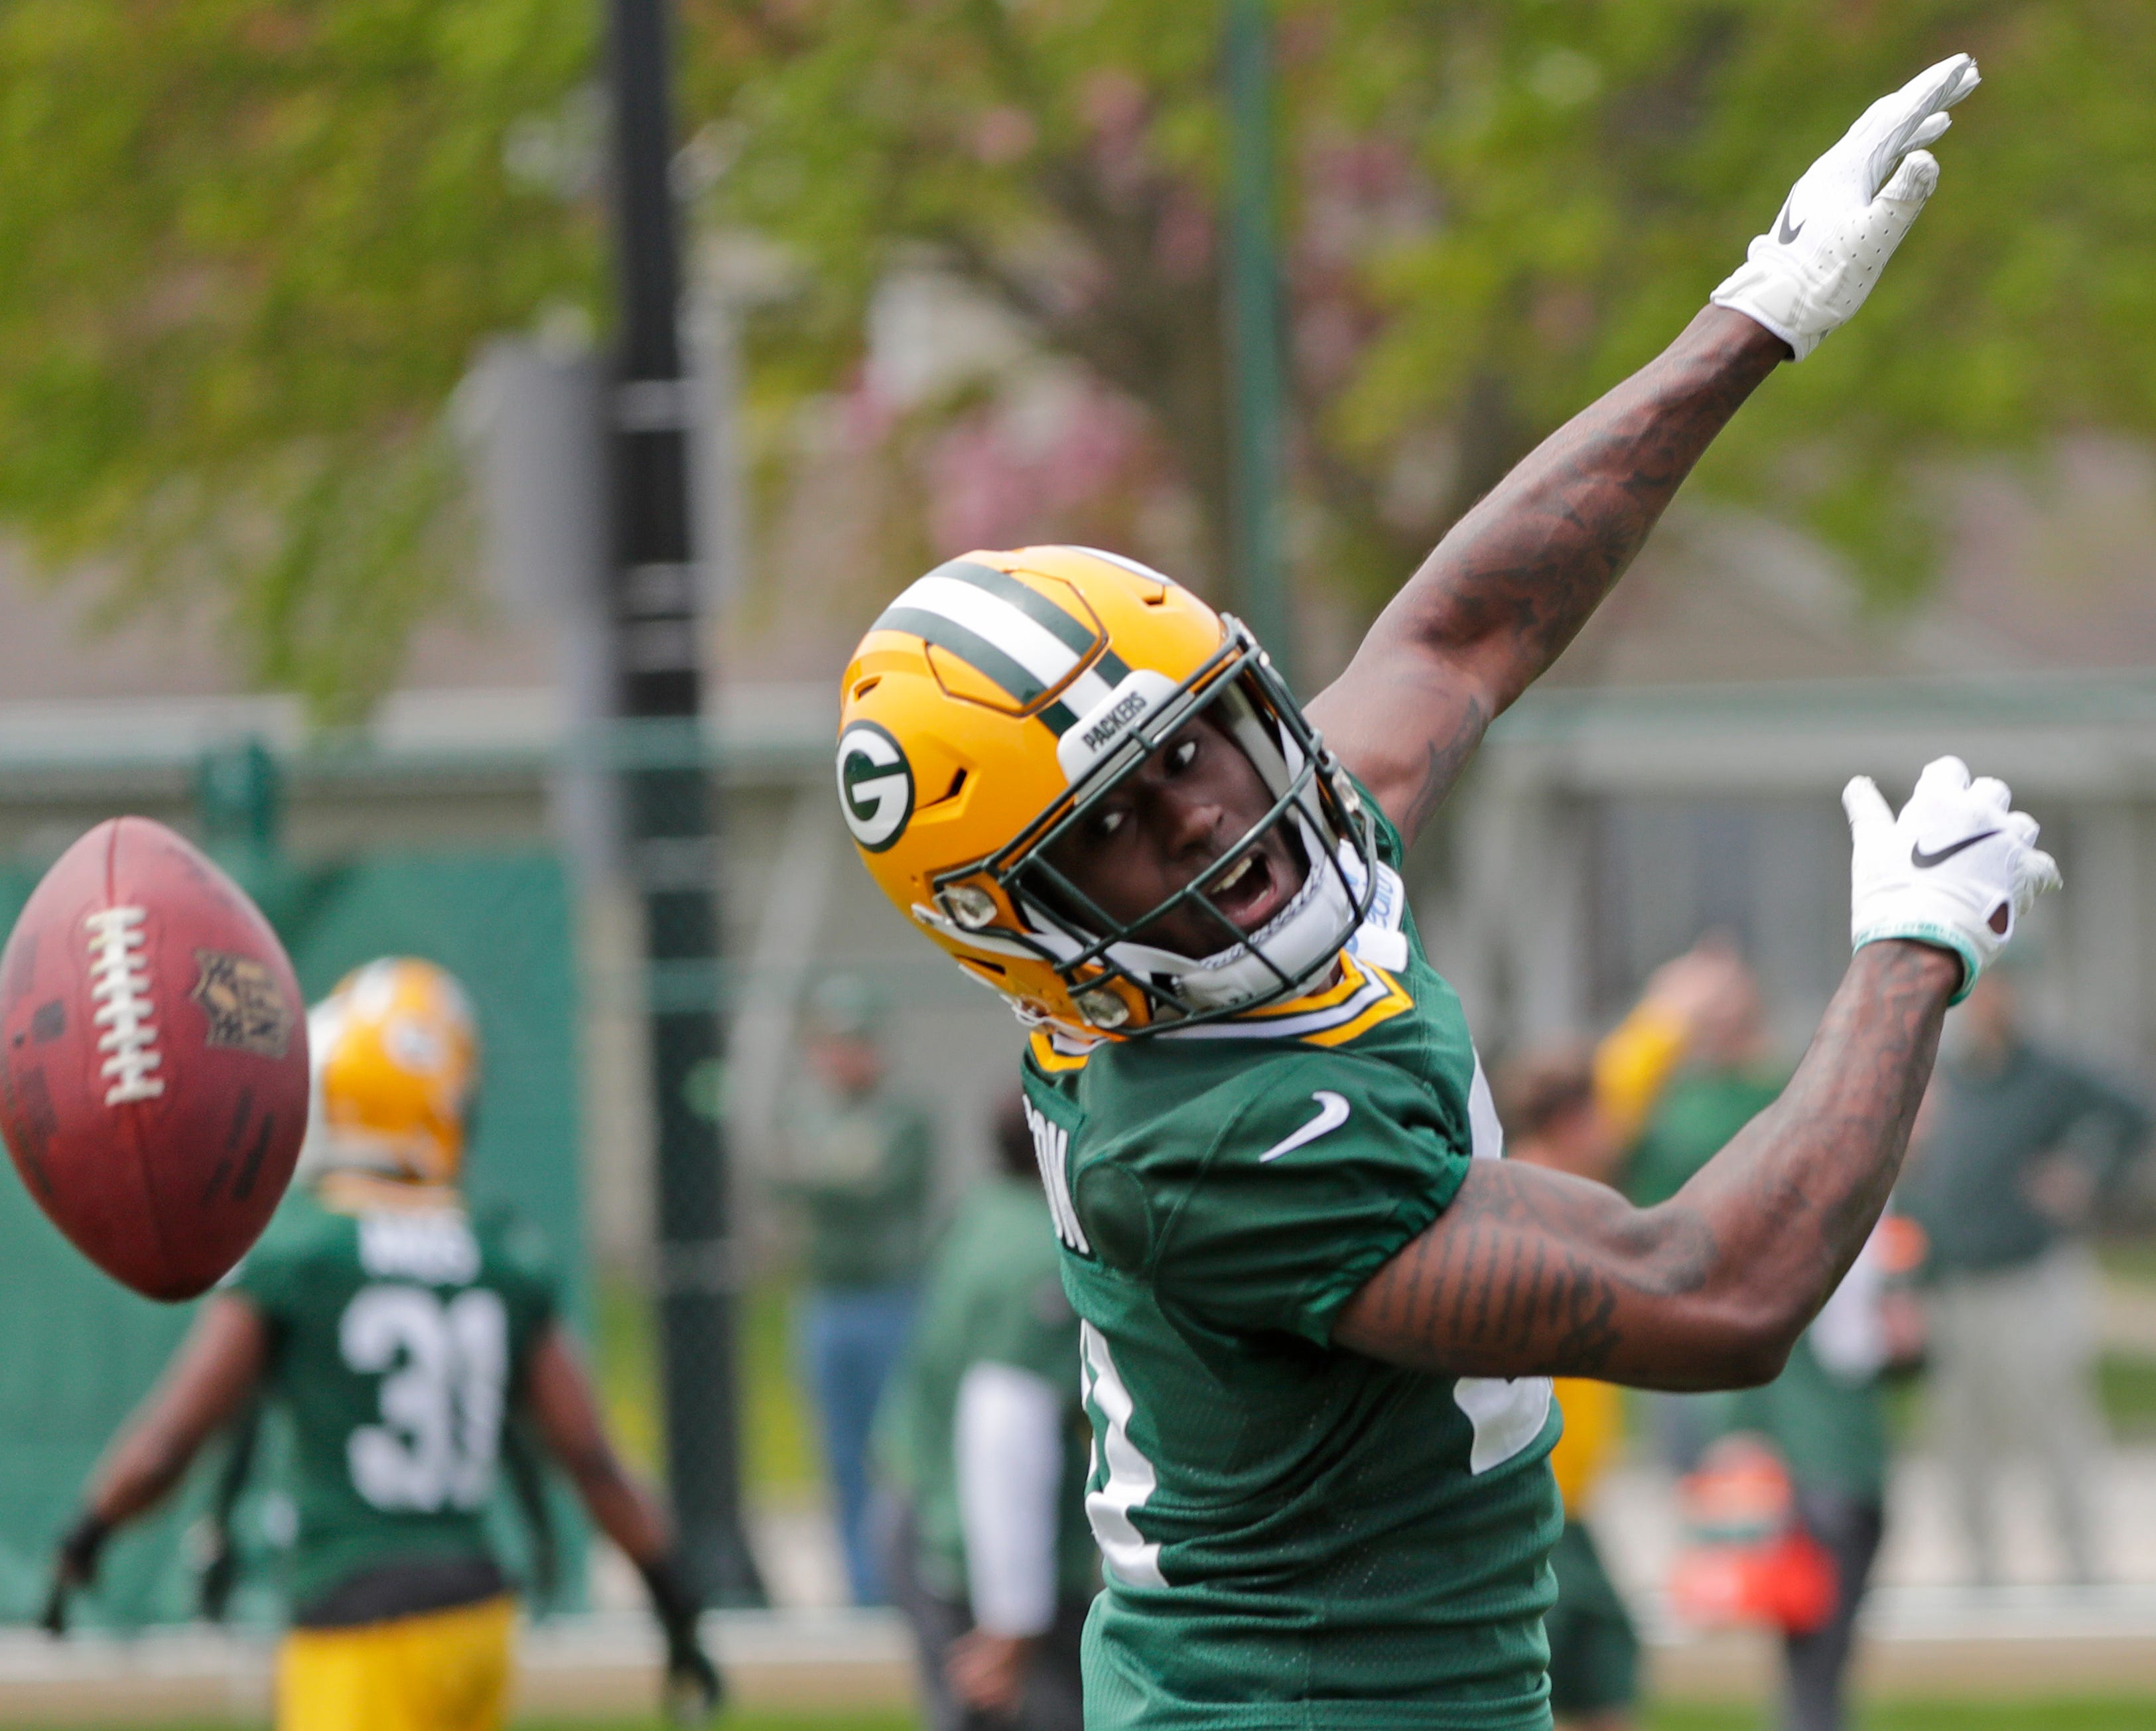 Green Bay Packers defensive back Natrell Jamerson (21) during practice at Clarke Hinkle Field on Tuesday, May 21, 2019 in Ashwaubenon, Wis.
Adam Wesley/USA TODAY NETWORK-Wis